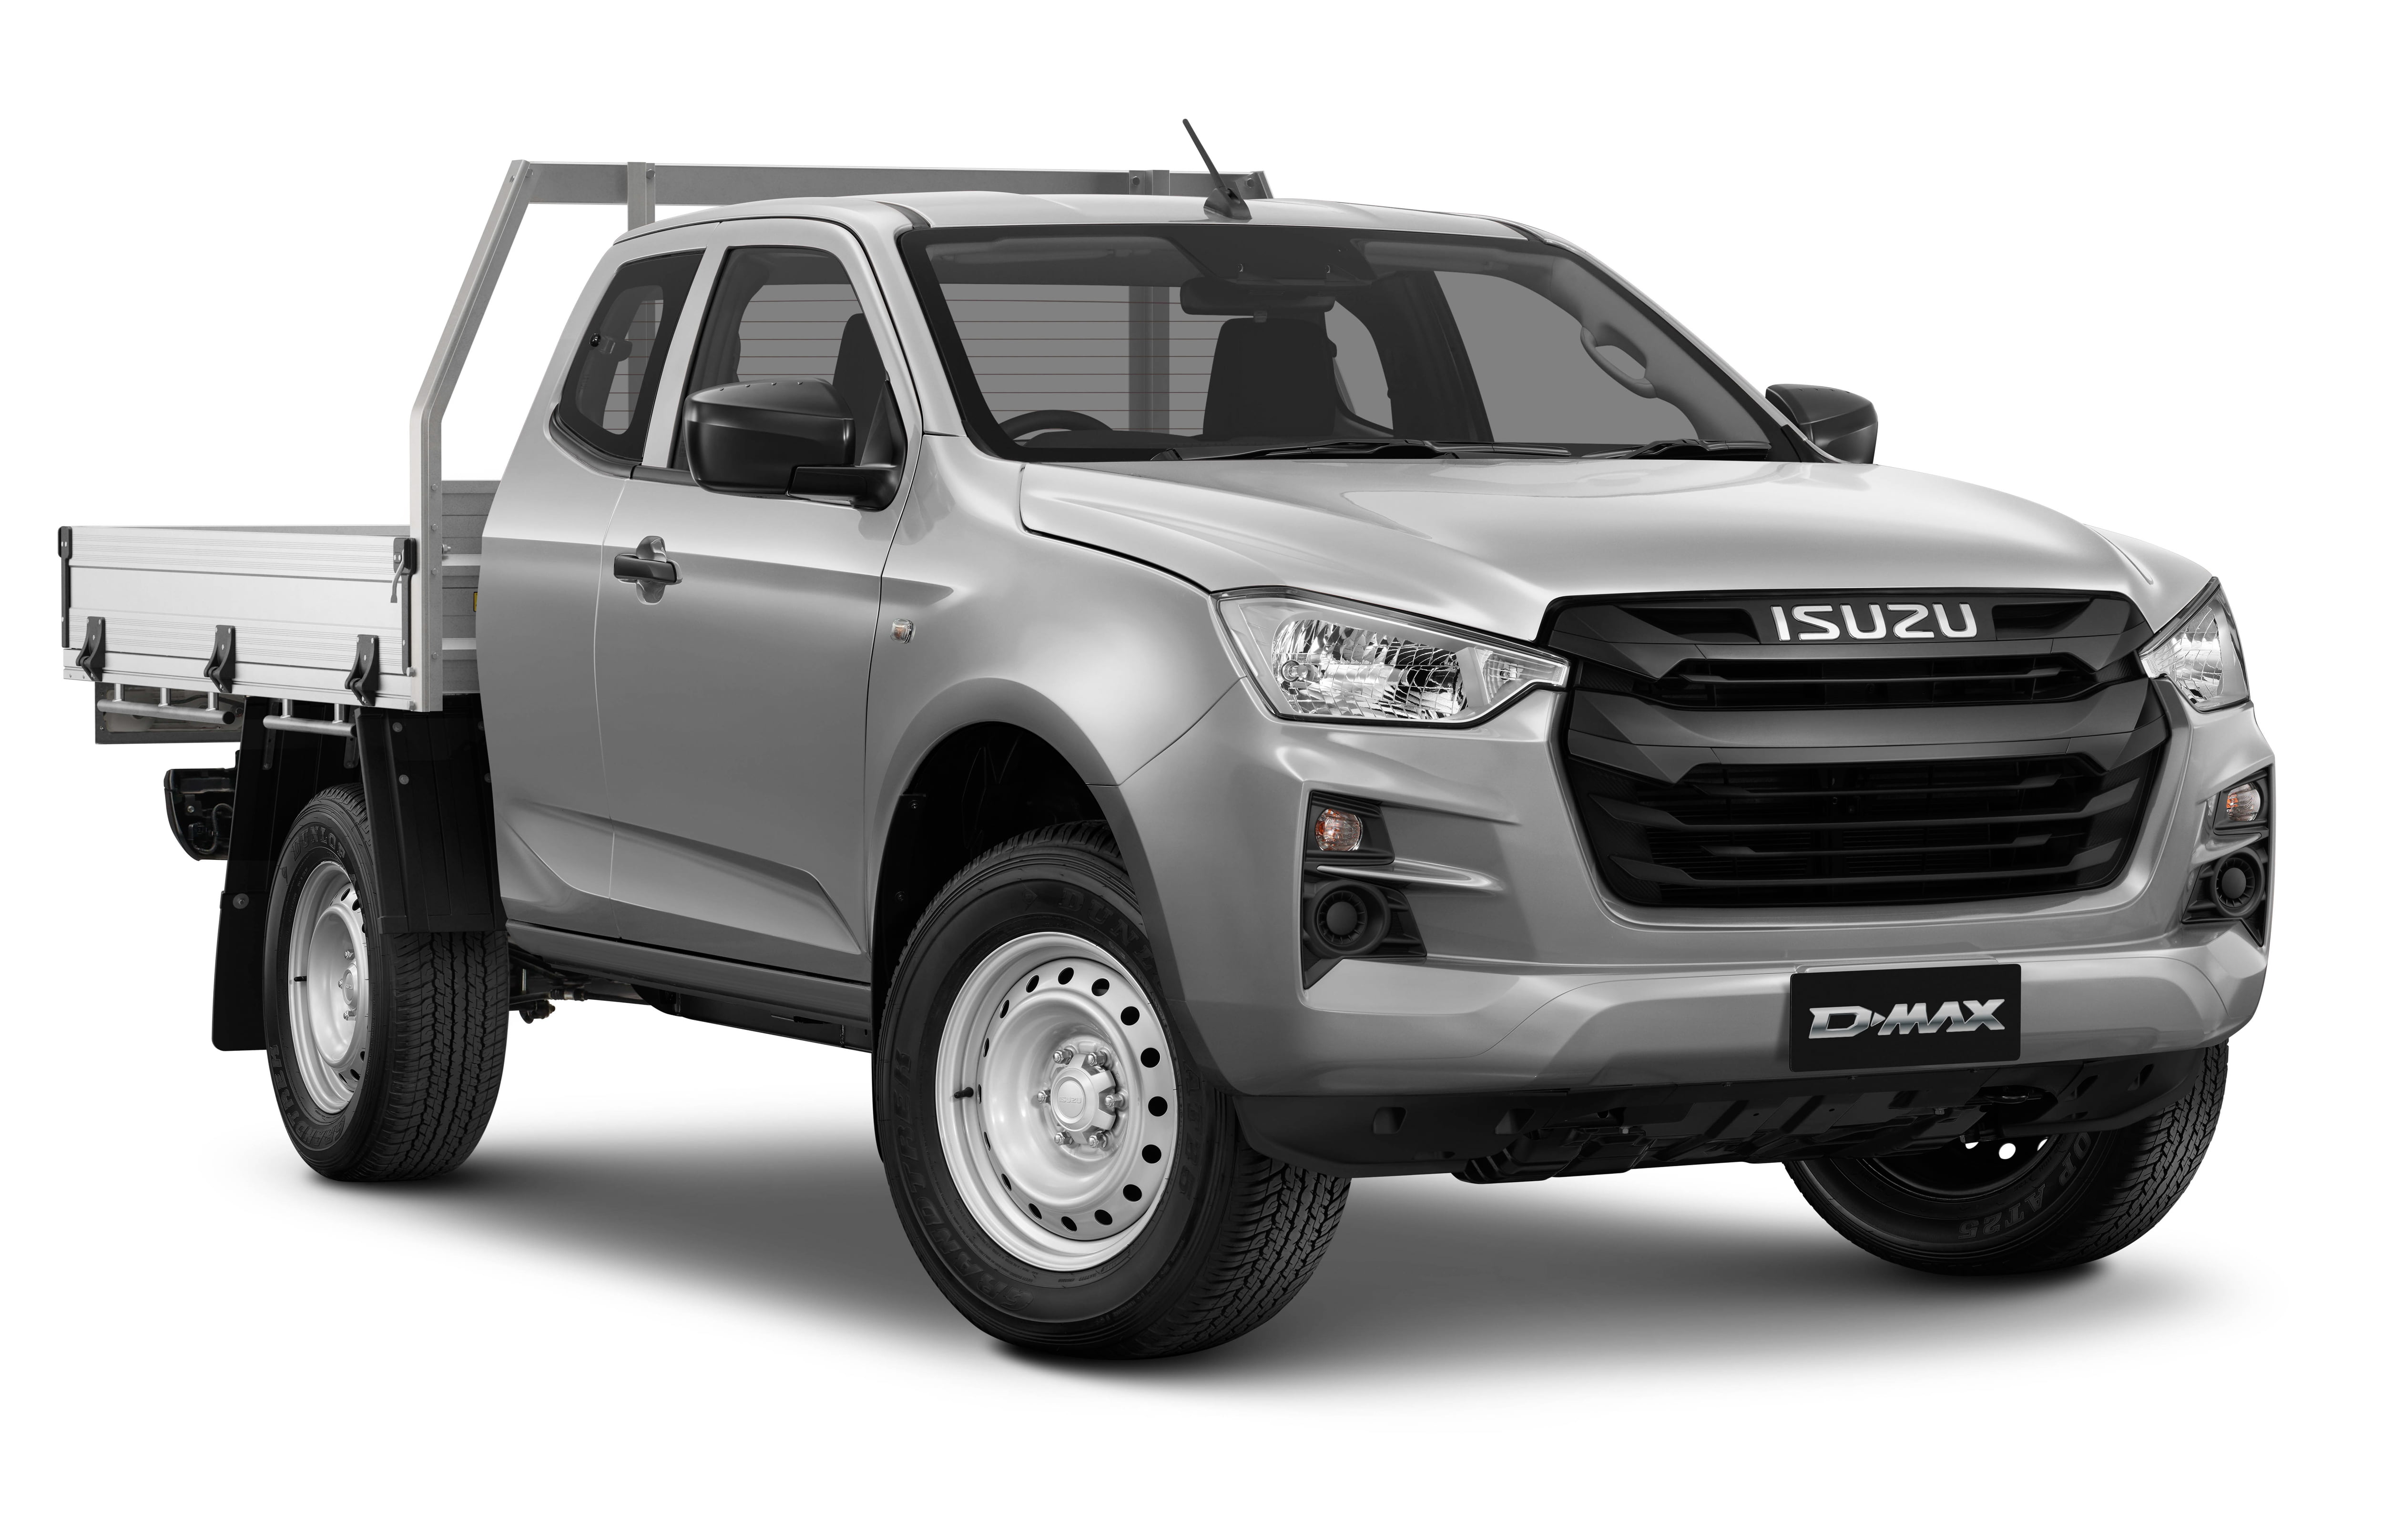 23MY ISUZU D-MAX SX SPACE CAB CHASSIS with Economy Alloy Tray Mercury Silver Metallic.